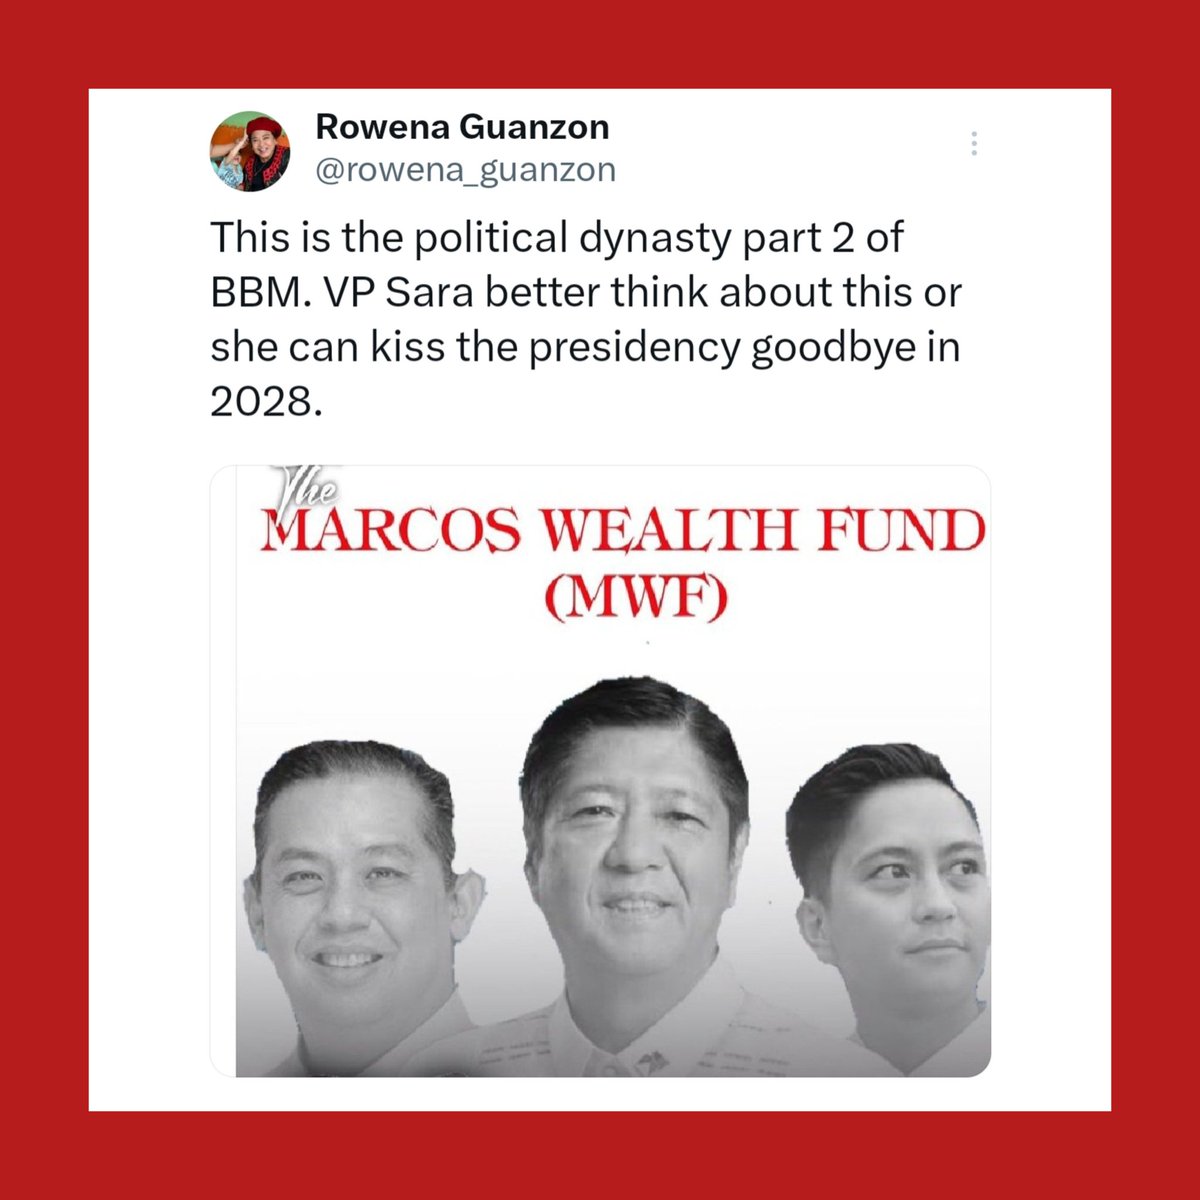 ■ OPINION: Is there a covert movement that aims to divide the UniTeam?

Is Guanzon part of this classic 'divide and conquer' strategy?

Also, to my fellow political commentators on twitter, let's check din our immediate circle if there are people who try to instigate…